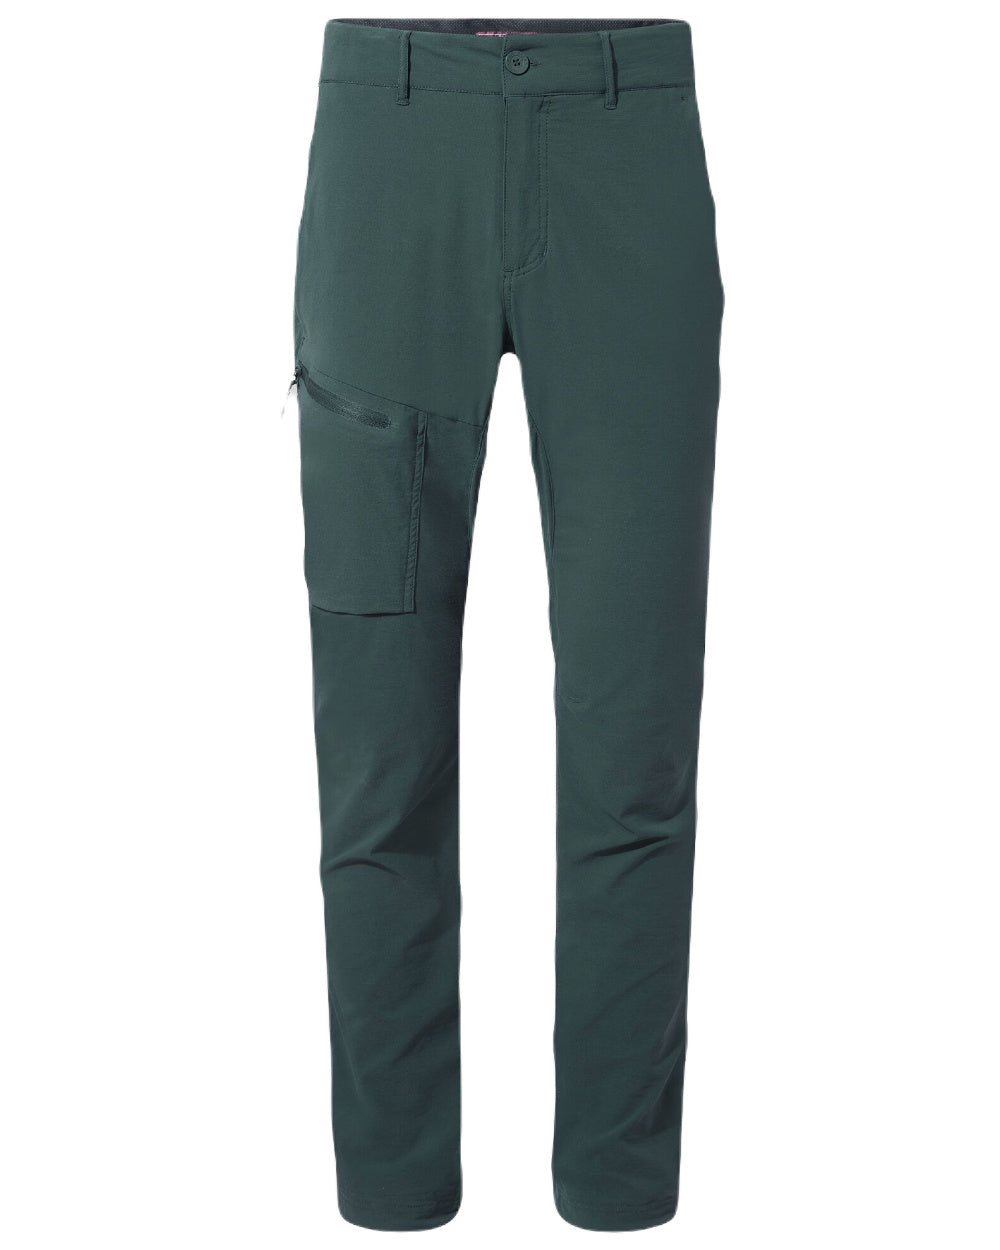 Spruce Green Coloured Craghoppers Mens NosiLife Pro Active Trousers On A White Background 